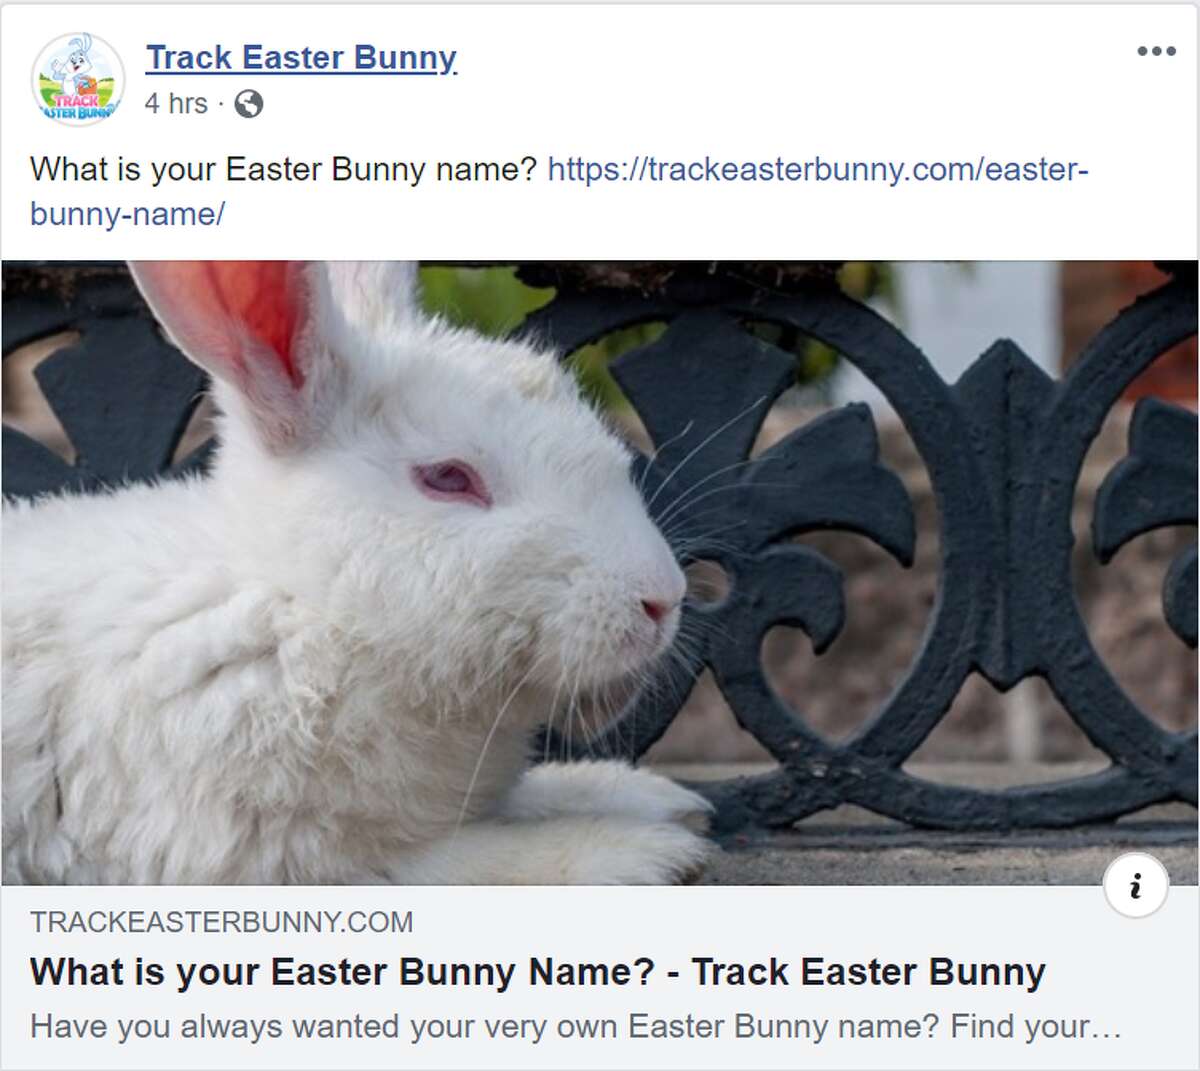 Play fun Easter games Play fun Easter games like finding out what your Easter Bunny name is through the Track Bunny website.